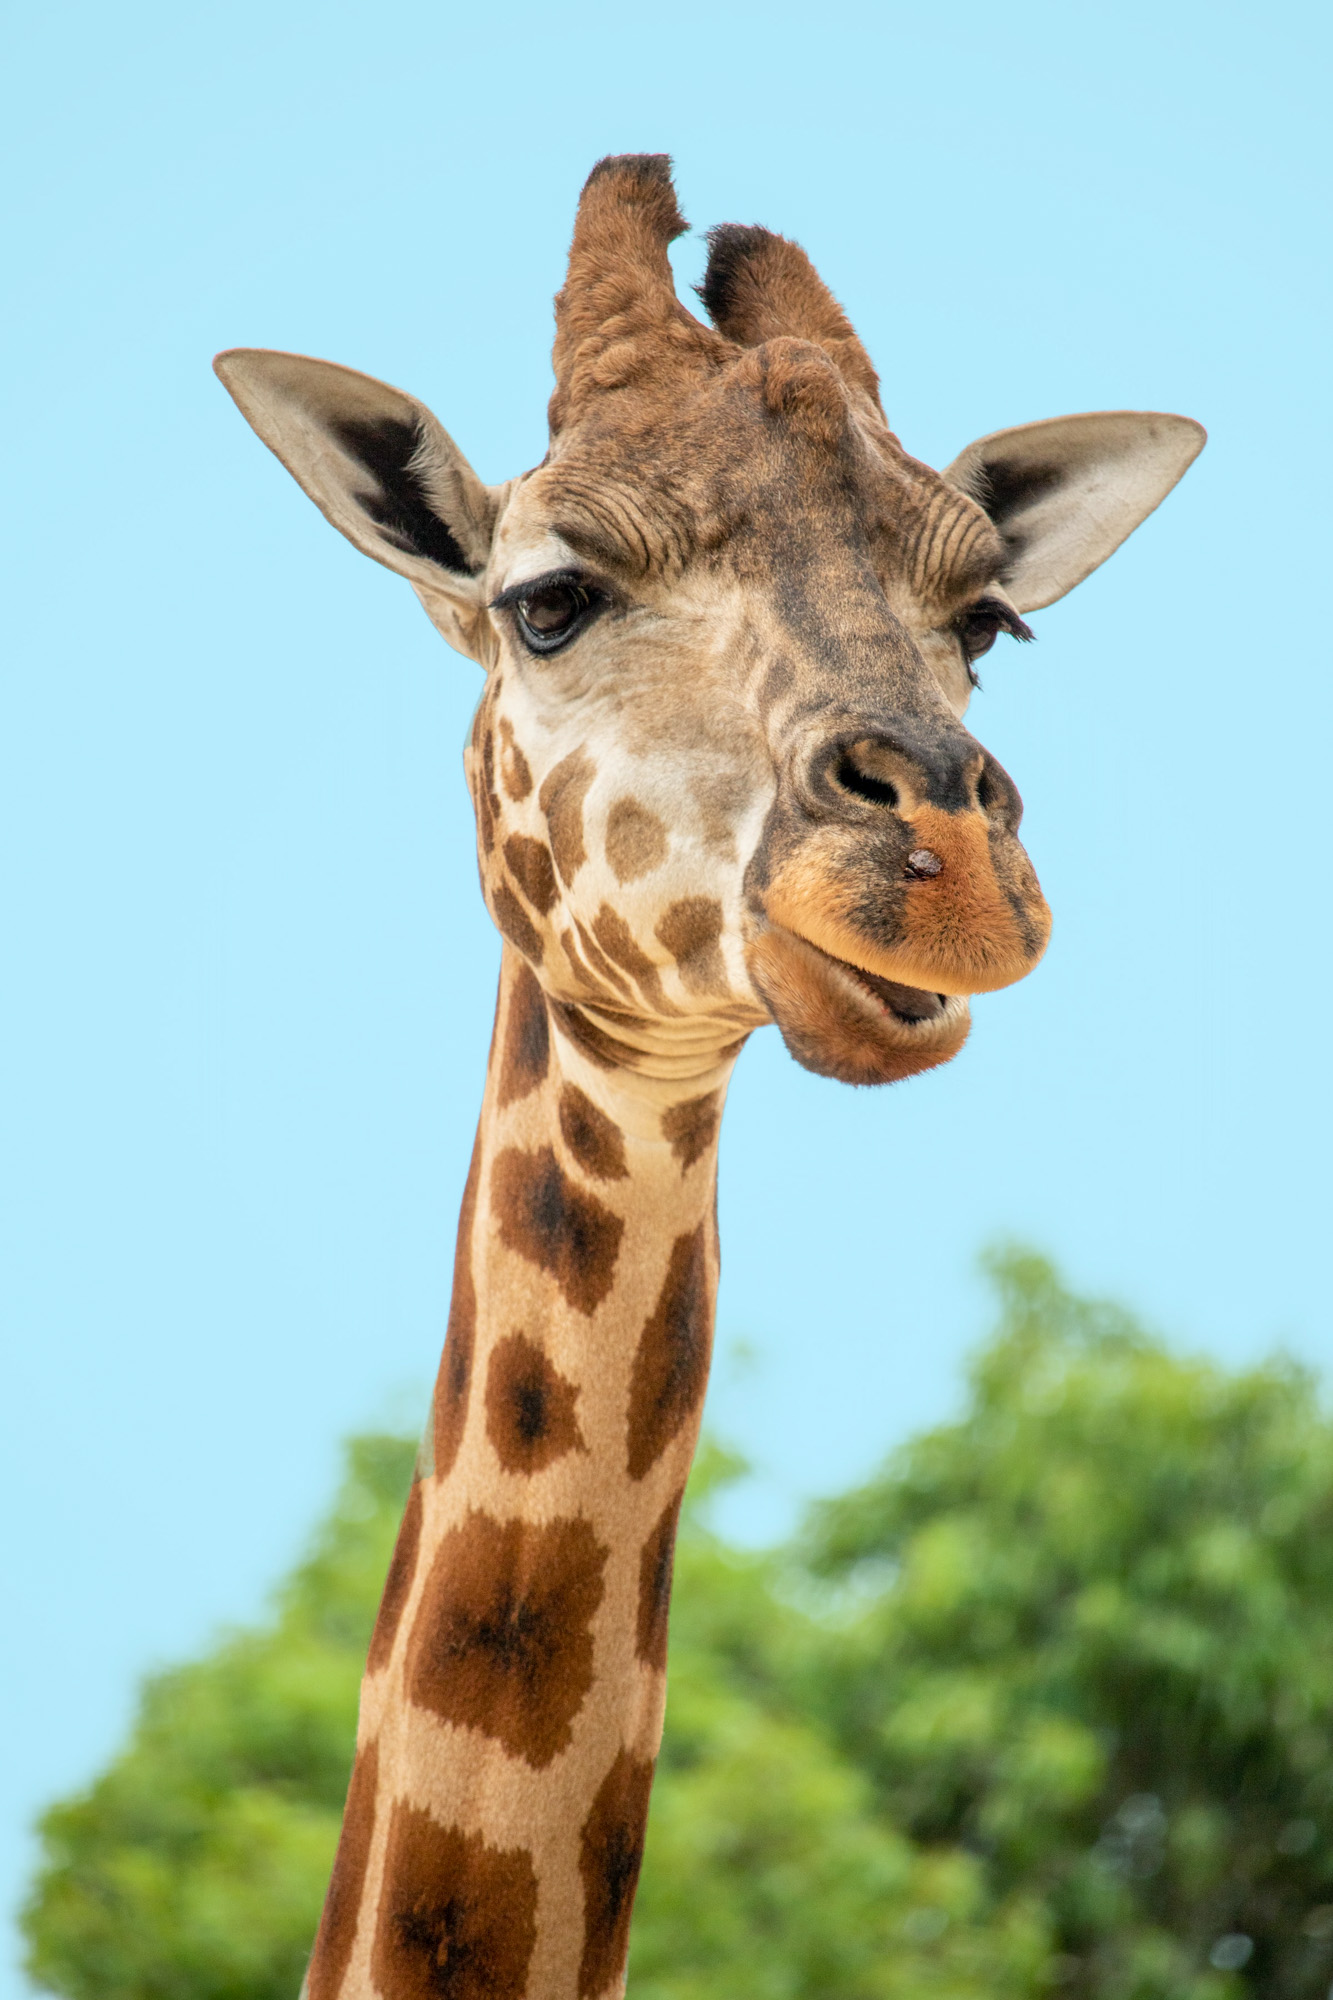 close up of a giraffe face and neck with a blue sky behind